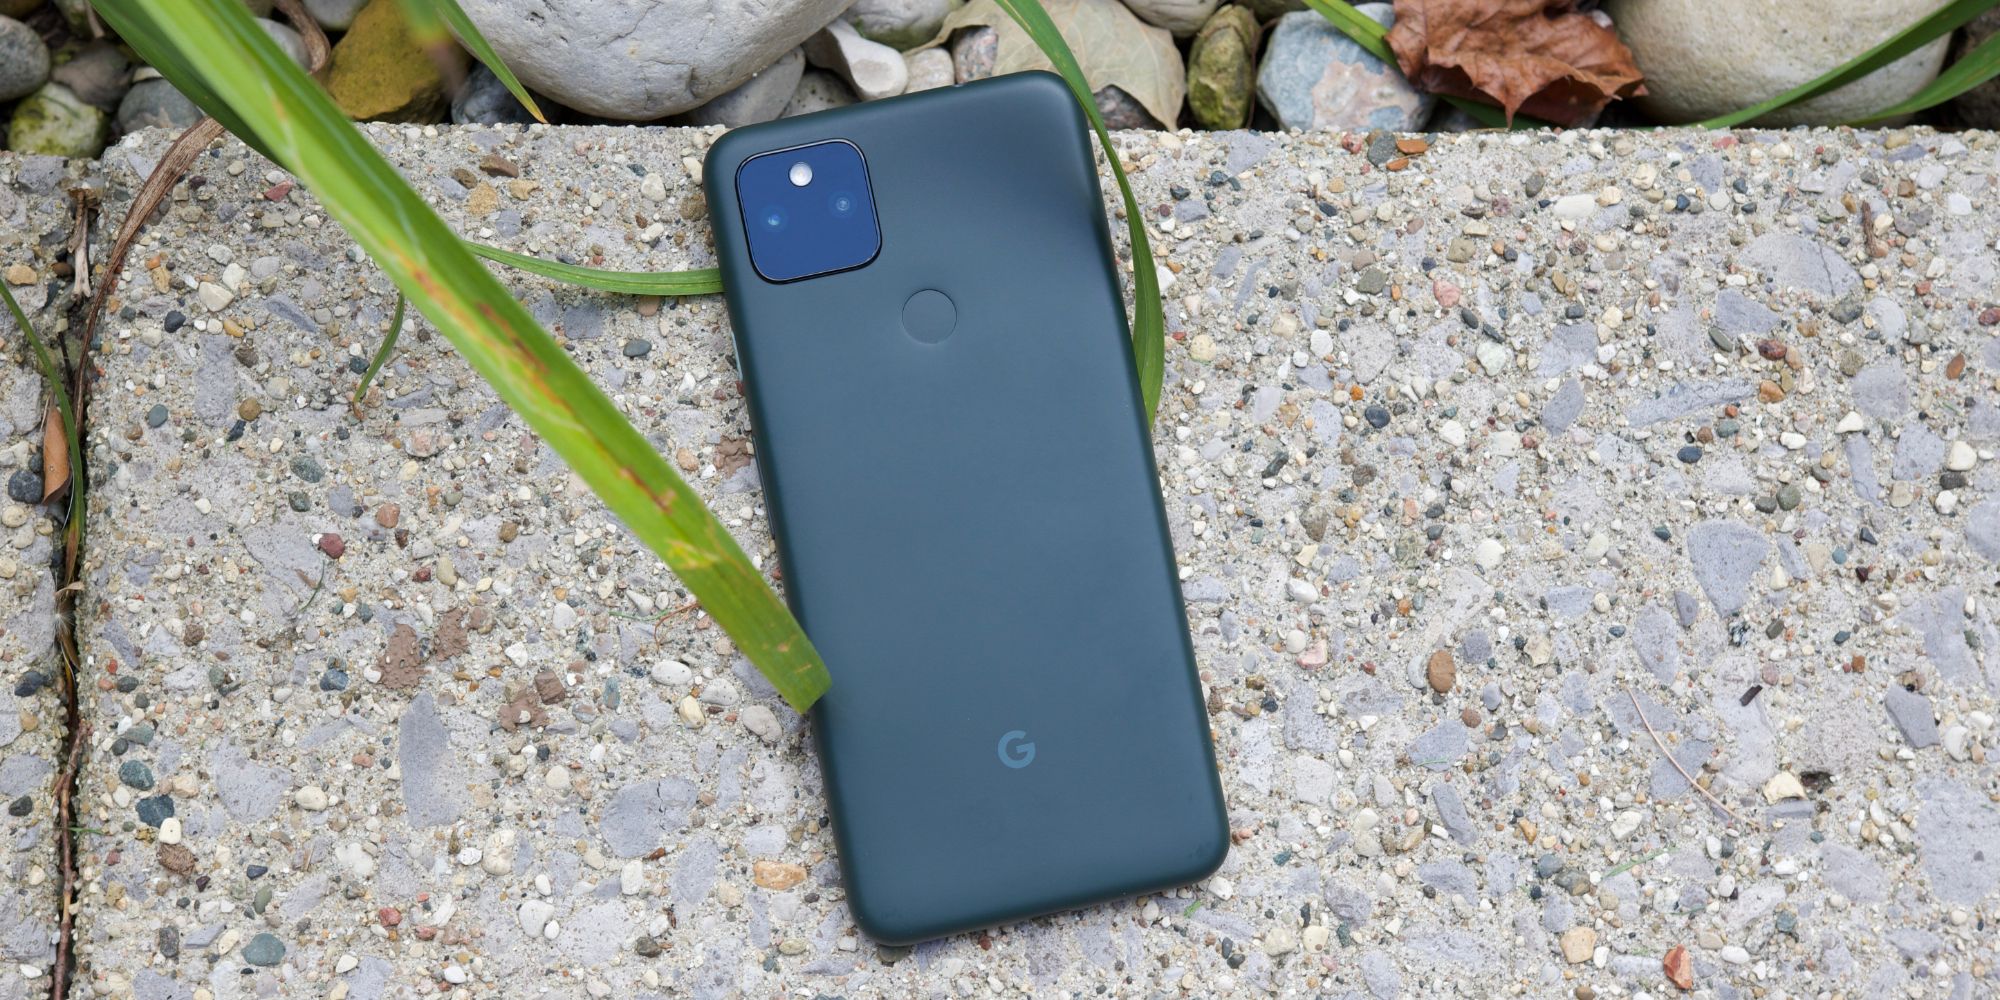 Forget The Pixel 6 Pro — The Pixel 6a Could Be Google's Most Exciting Phone